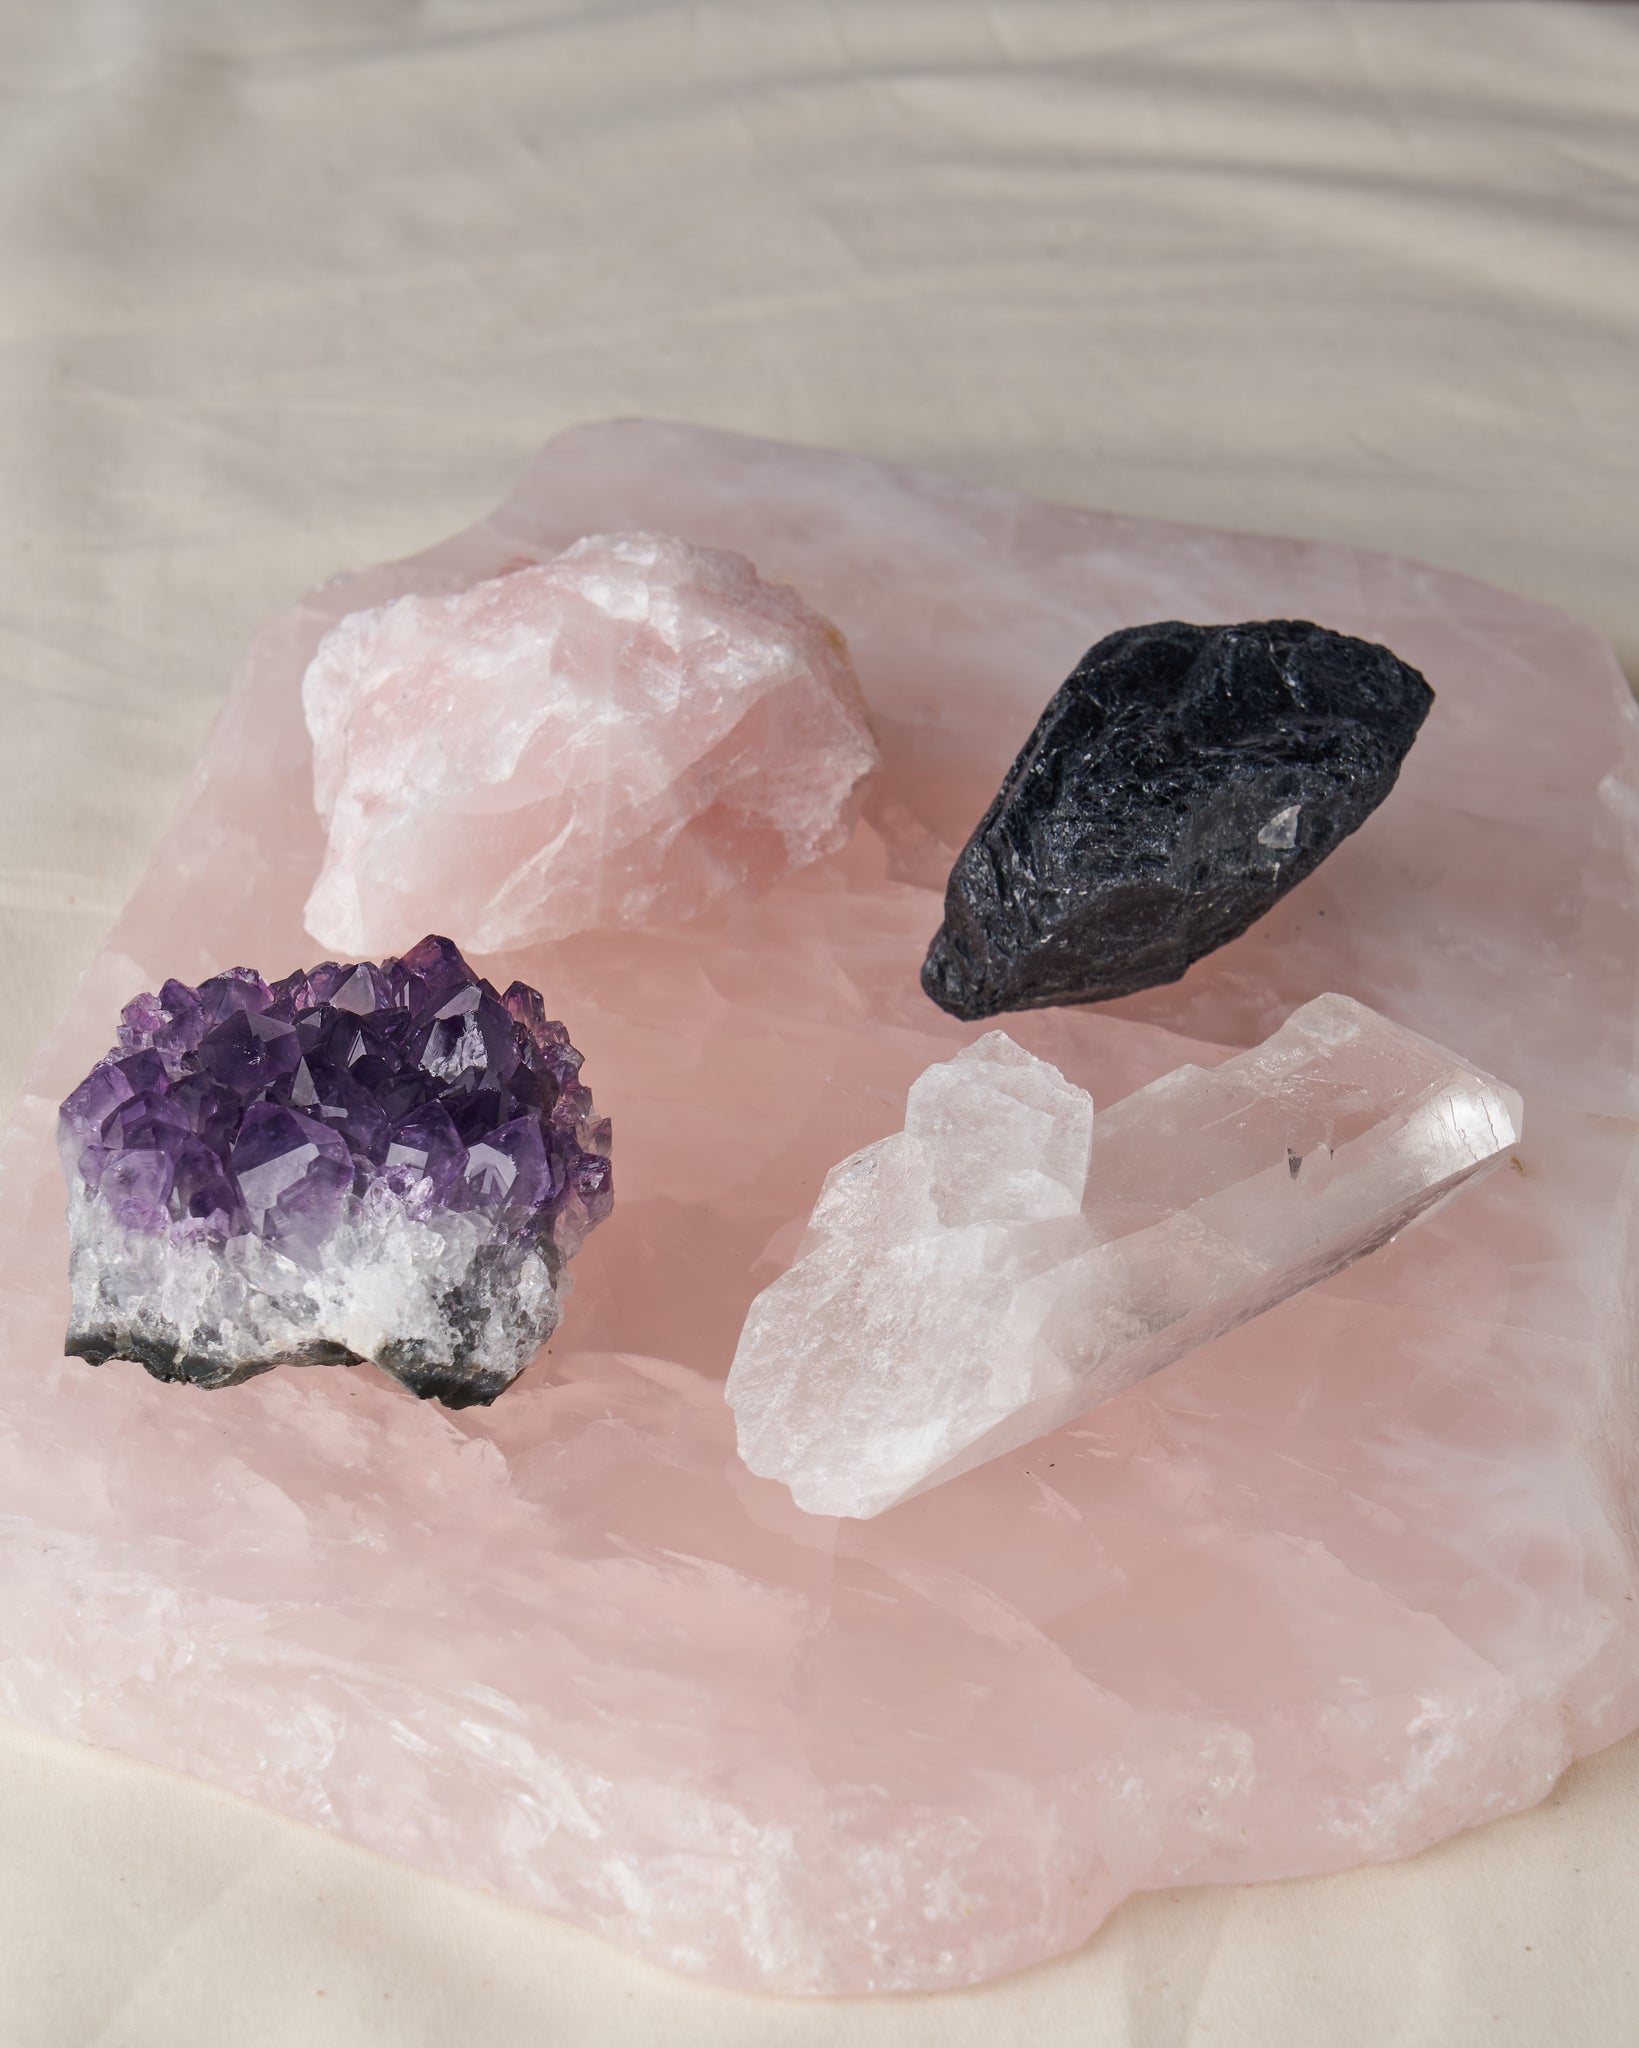 Experience the Power of Healing and Protection with Amethyst, Black Tourmaline, Rose Quartz, and Clear Quartz | Crystal Set | Energy Healing | Spiritual Development | Grounding Stone | Universal Love | Cleansing and Charging | 3”x2” Palm-Sized Stones